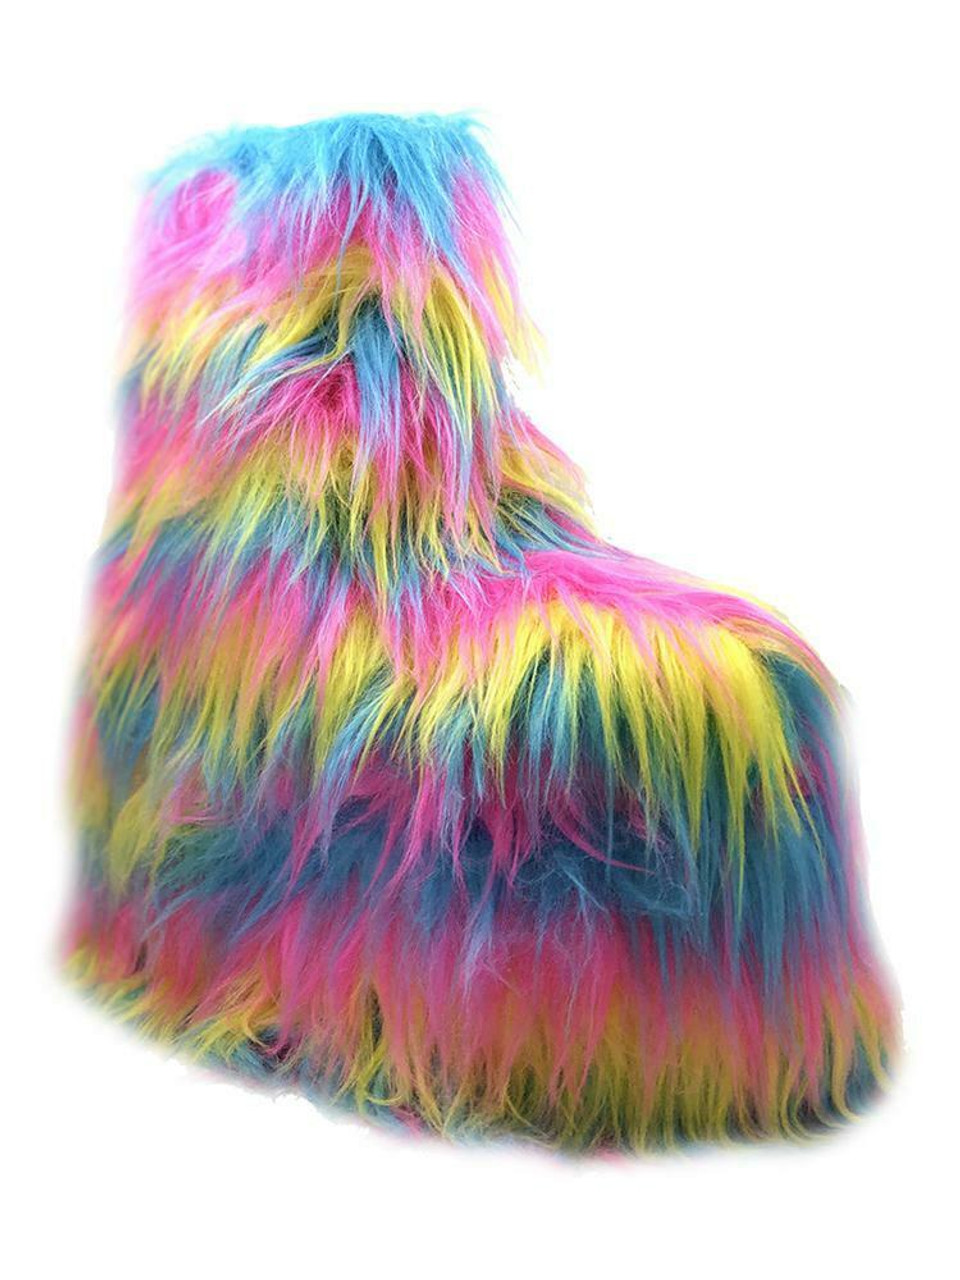 furry boots rave